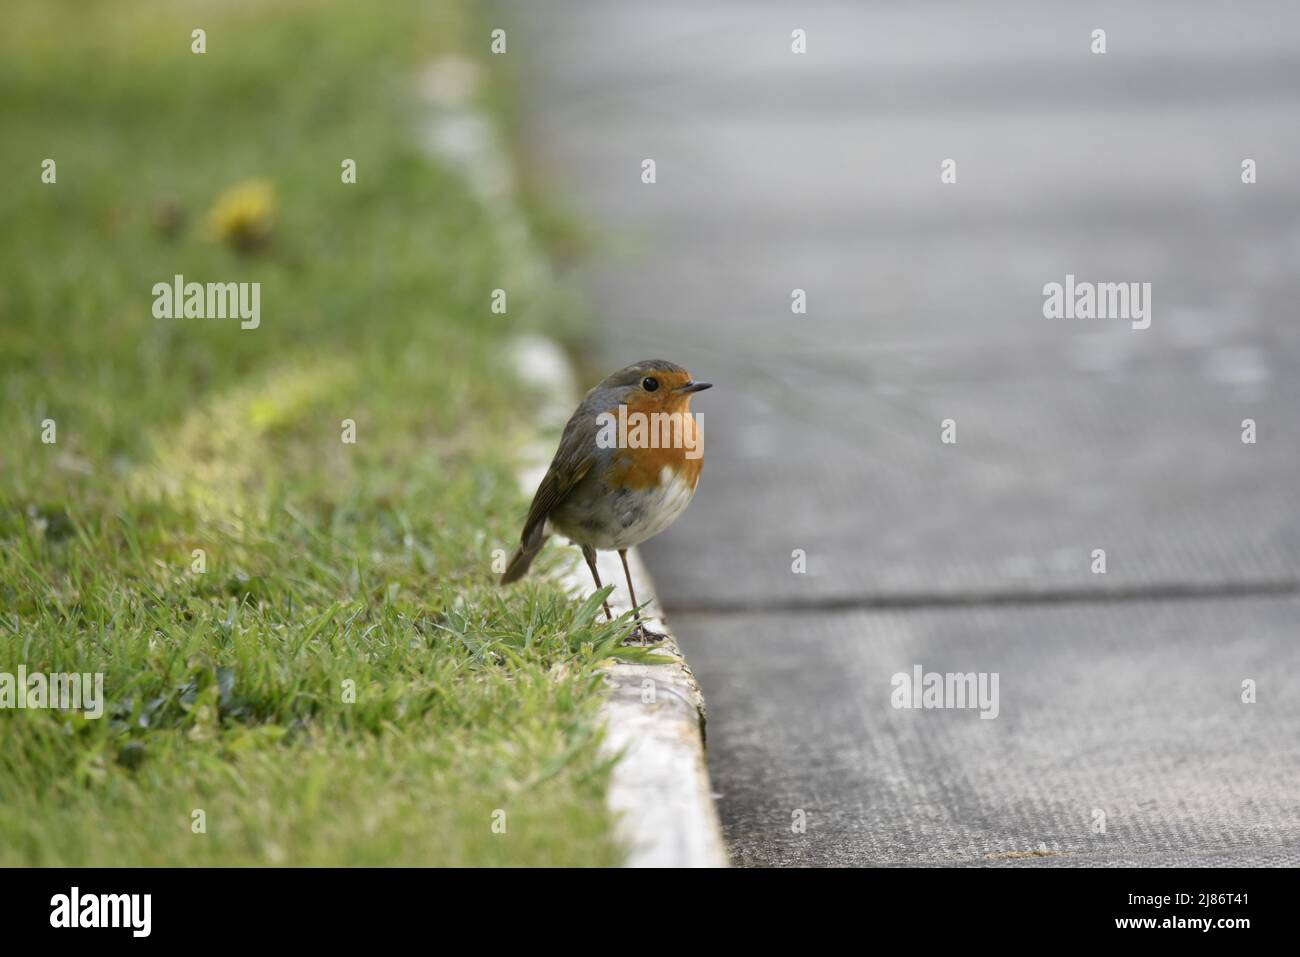 European Robin (Erithacus rubecula) Standing in Right-Profile on a Kerb at the Edge of a Grass Verge to Left Foreground of Image, Looking to Right, UK Stock Photo